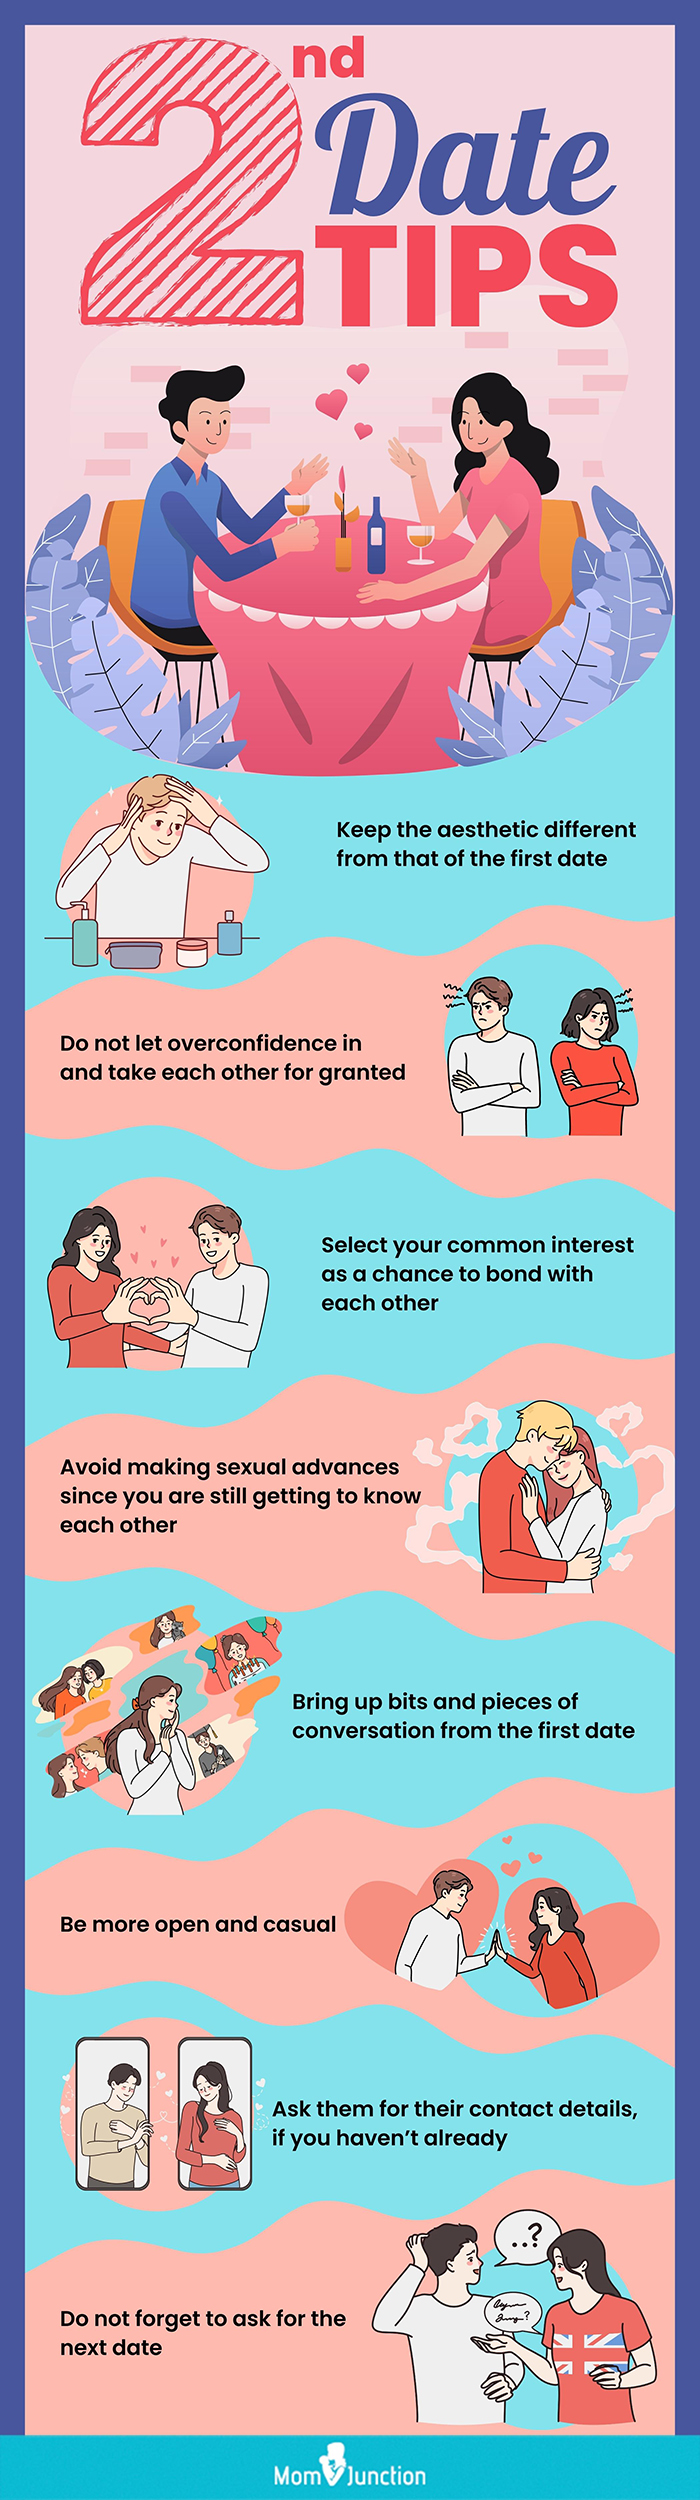 second date tips [infographic]